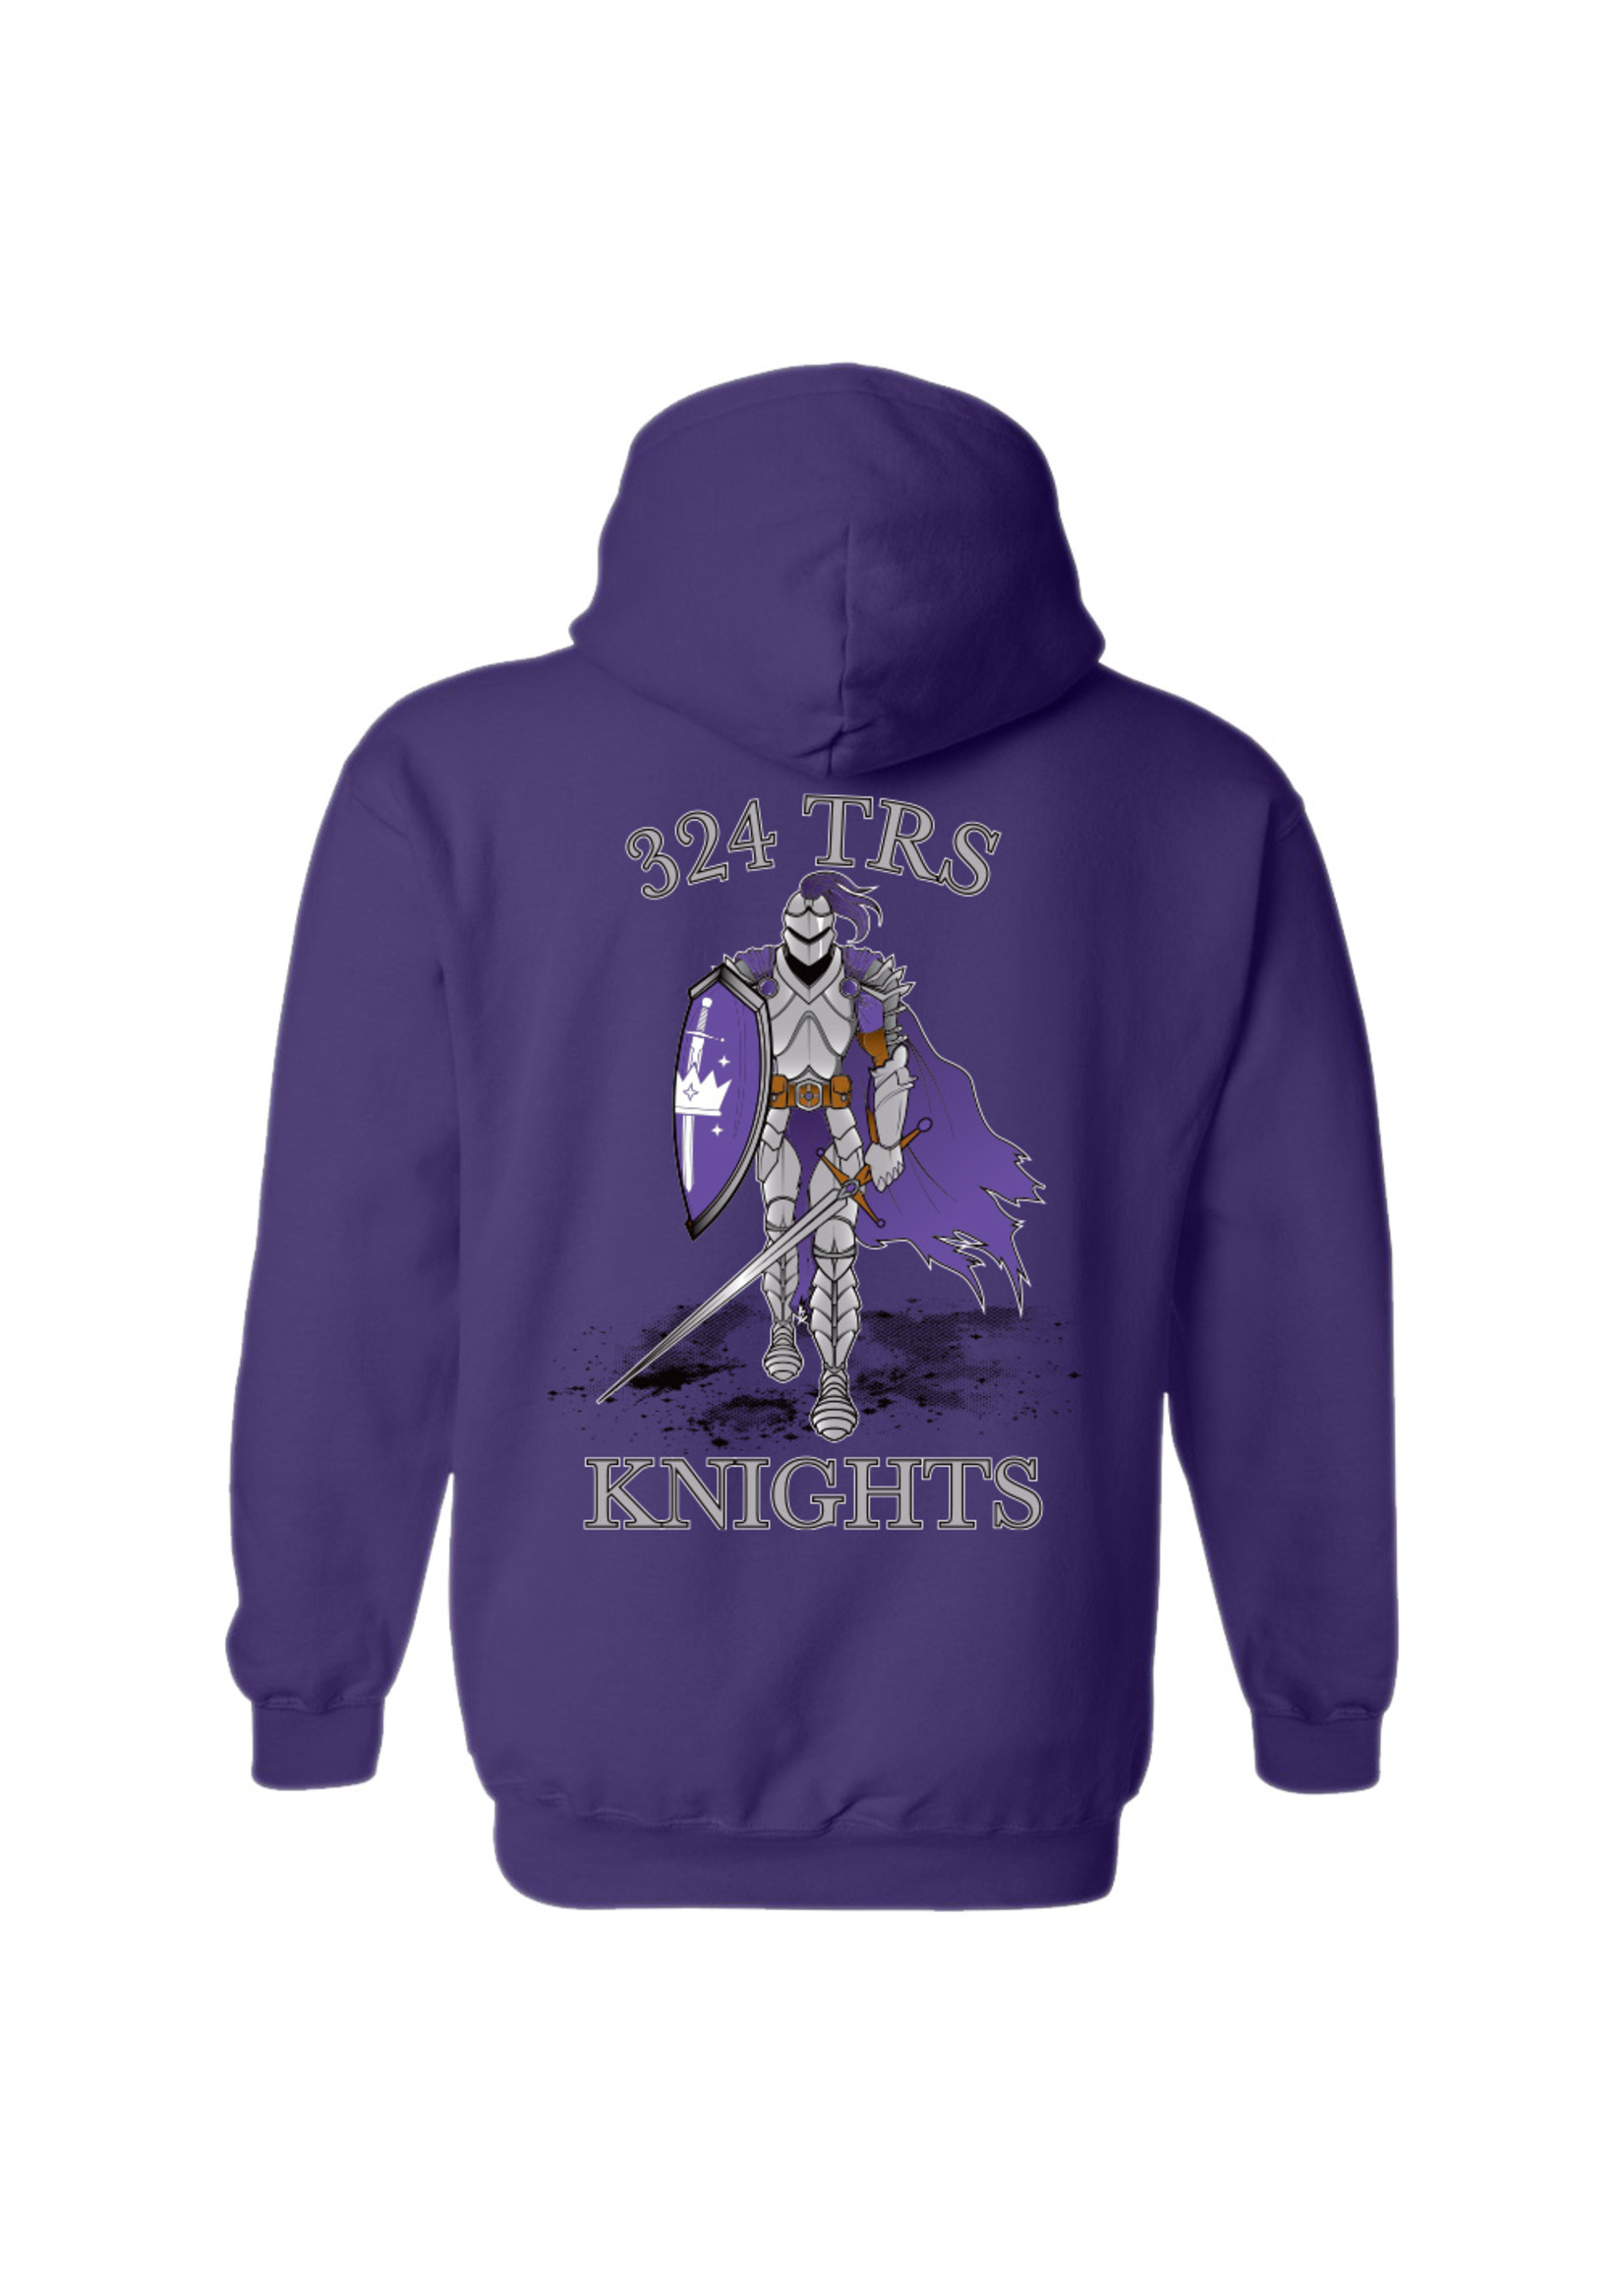 324th Knights Cotton Hoodie